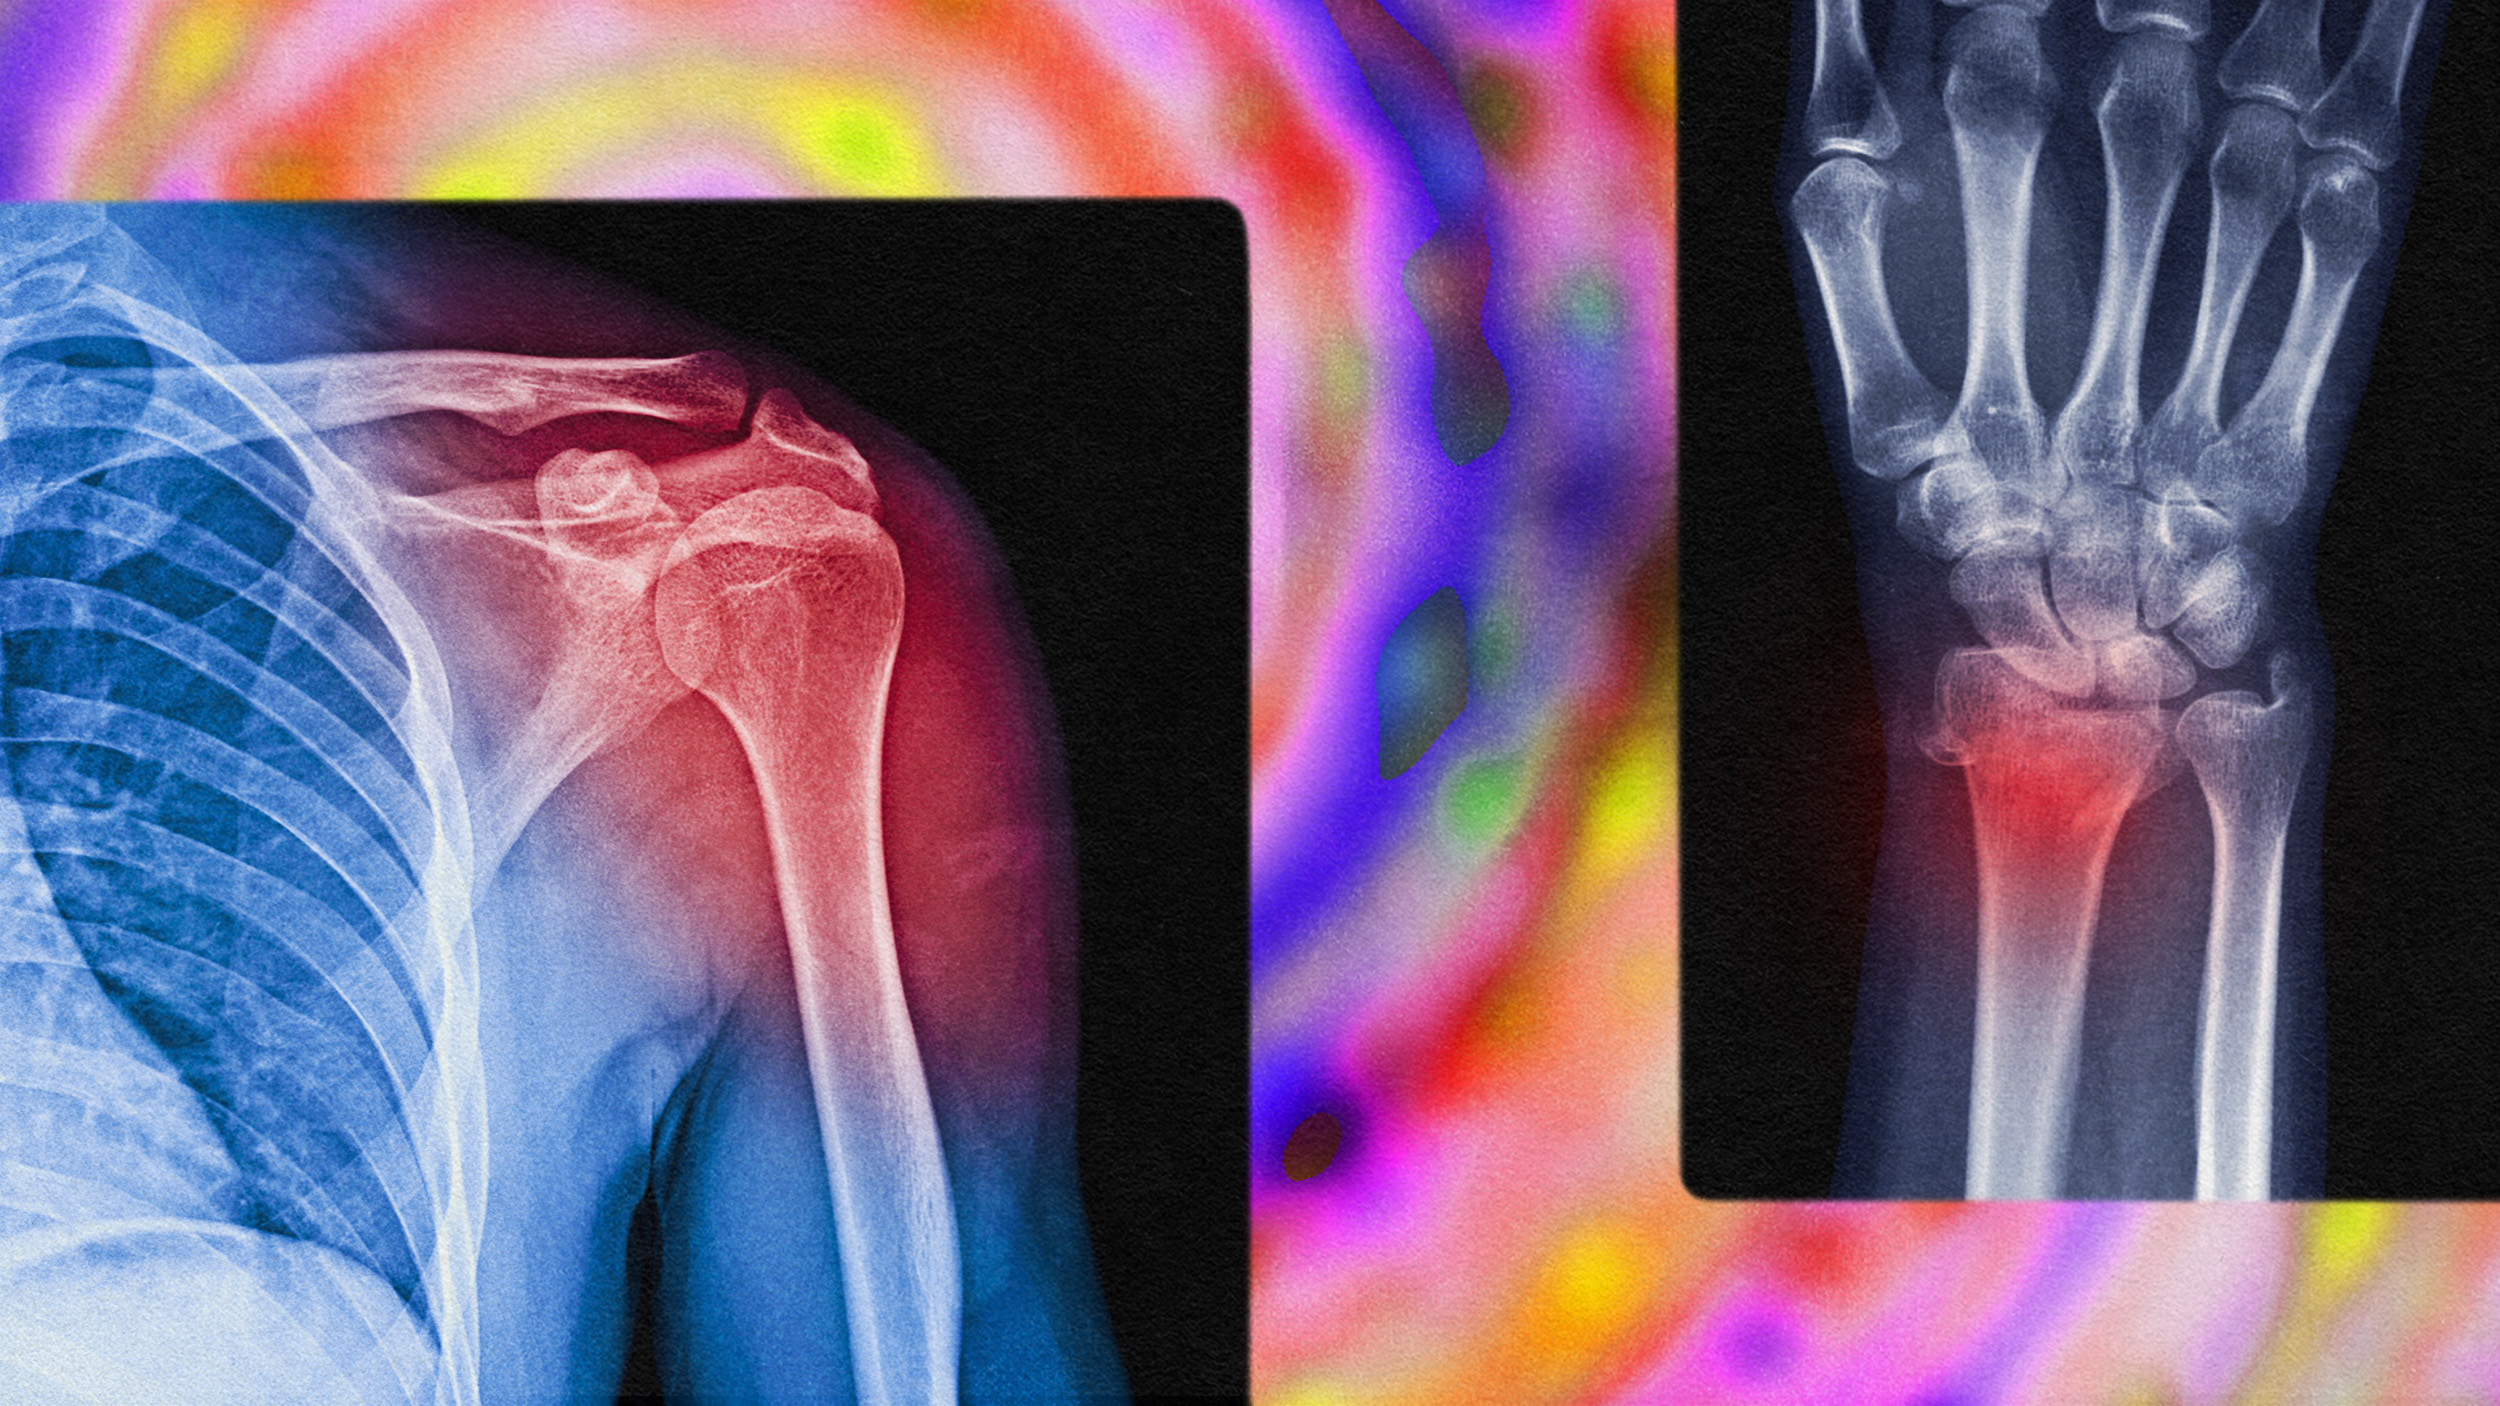 X-ray images of a shoulder and a wrist with highlighted areas in red indicating injuries or inflammation, set against a colorful, abstract background.